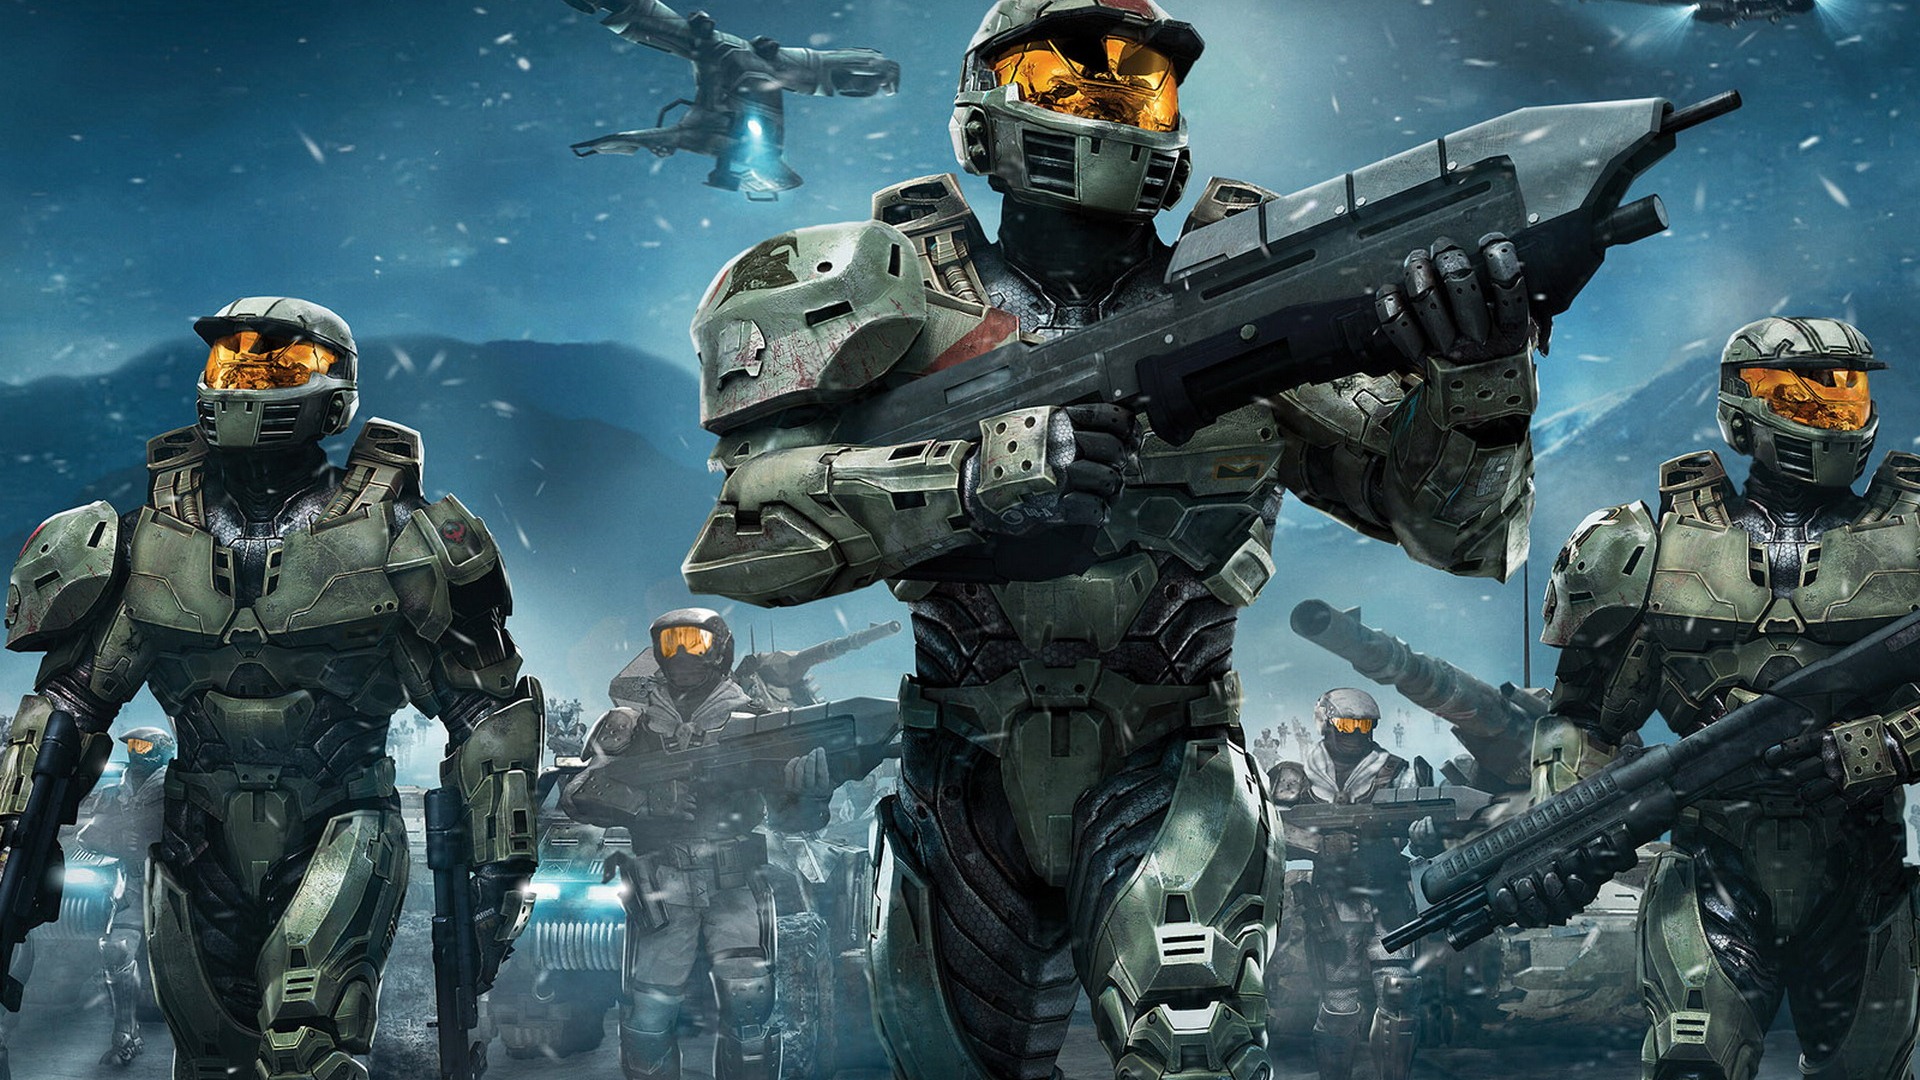 Halo game HD wallpapers #25 - 1920x1080